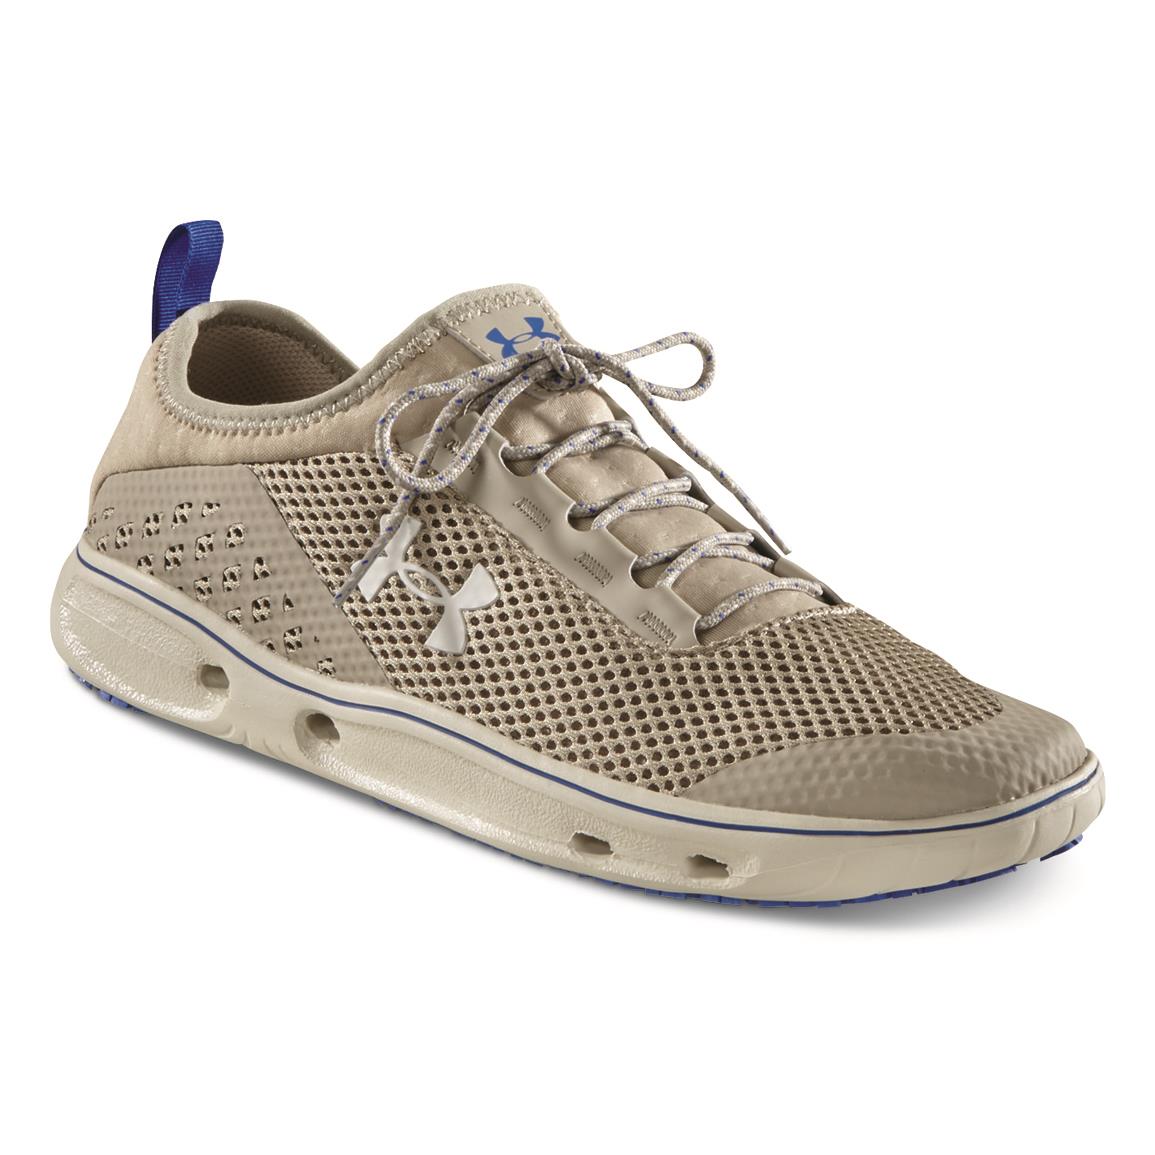 under armour men's water boat shoes 